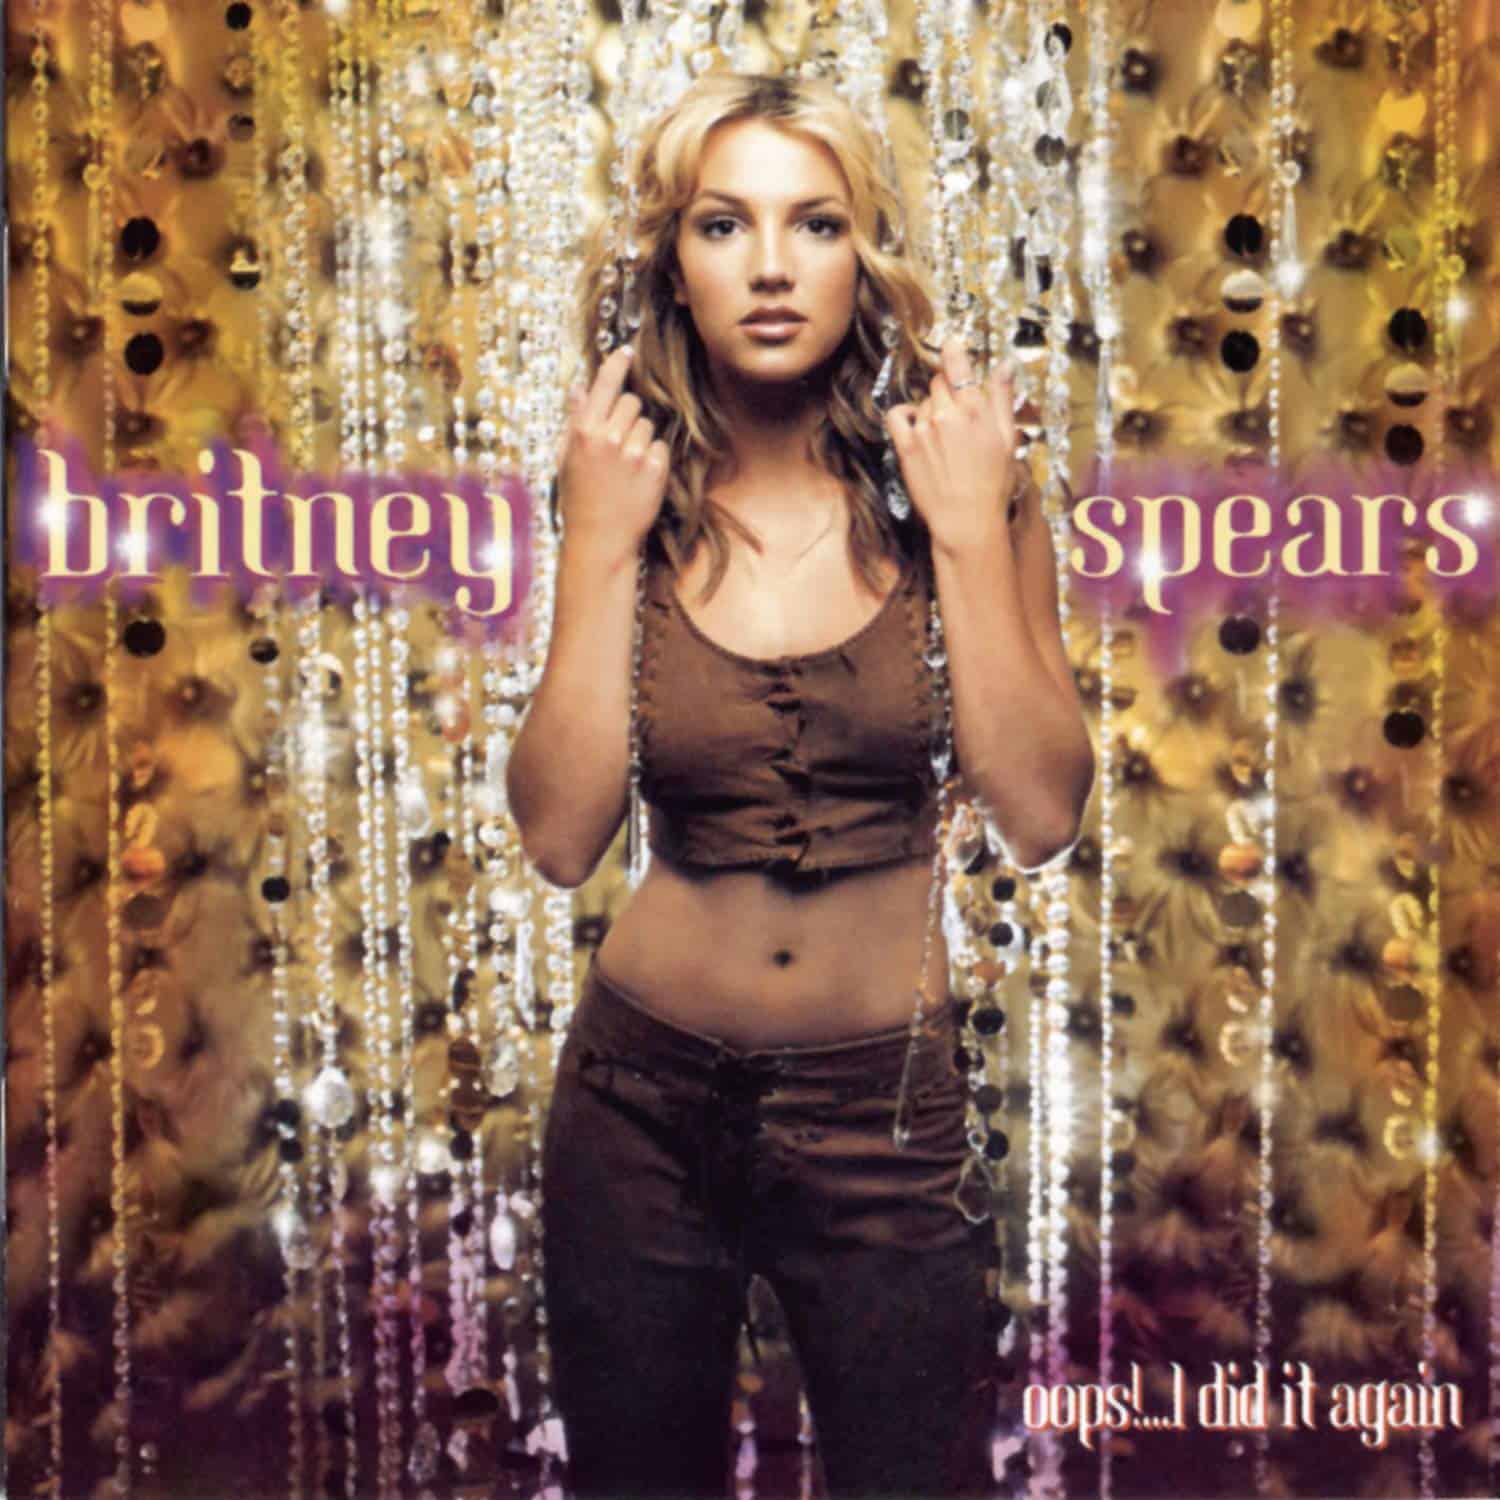 BRITNEY SPEARS - OOPS!... I DID IT AGAIN